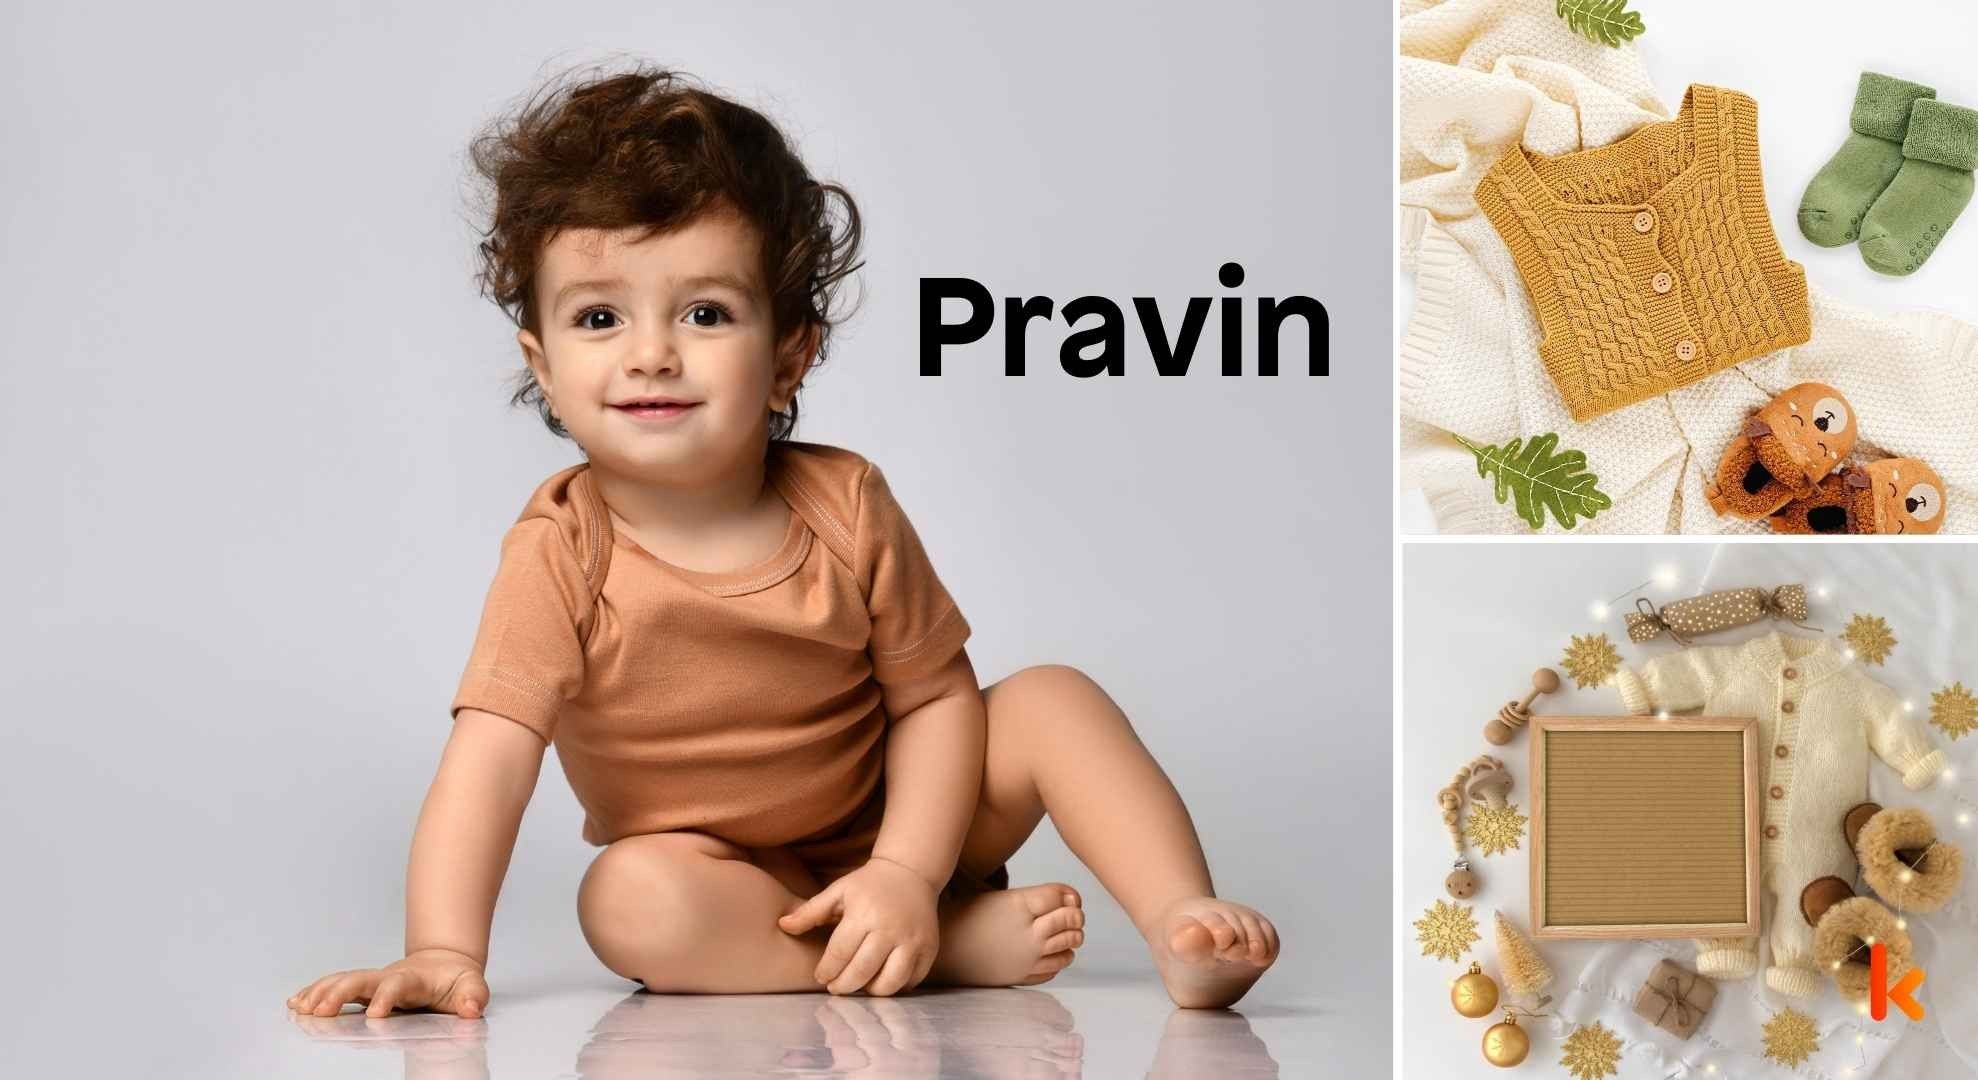 Meaning of the name Pravin